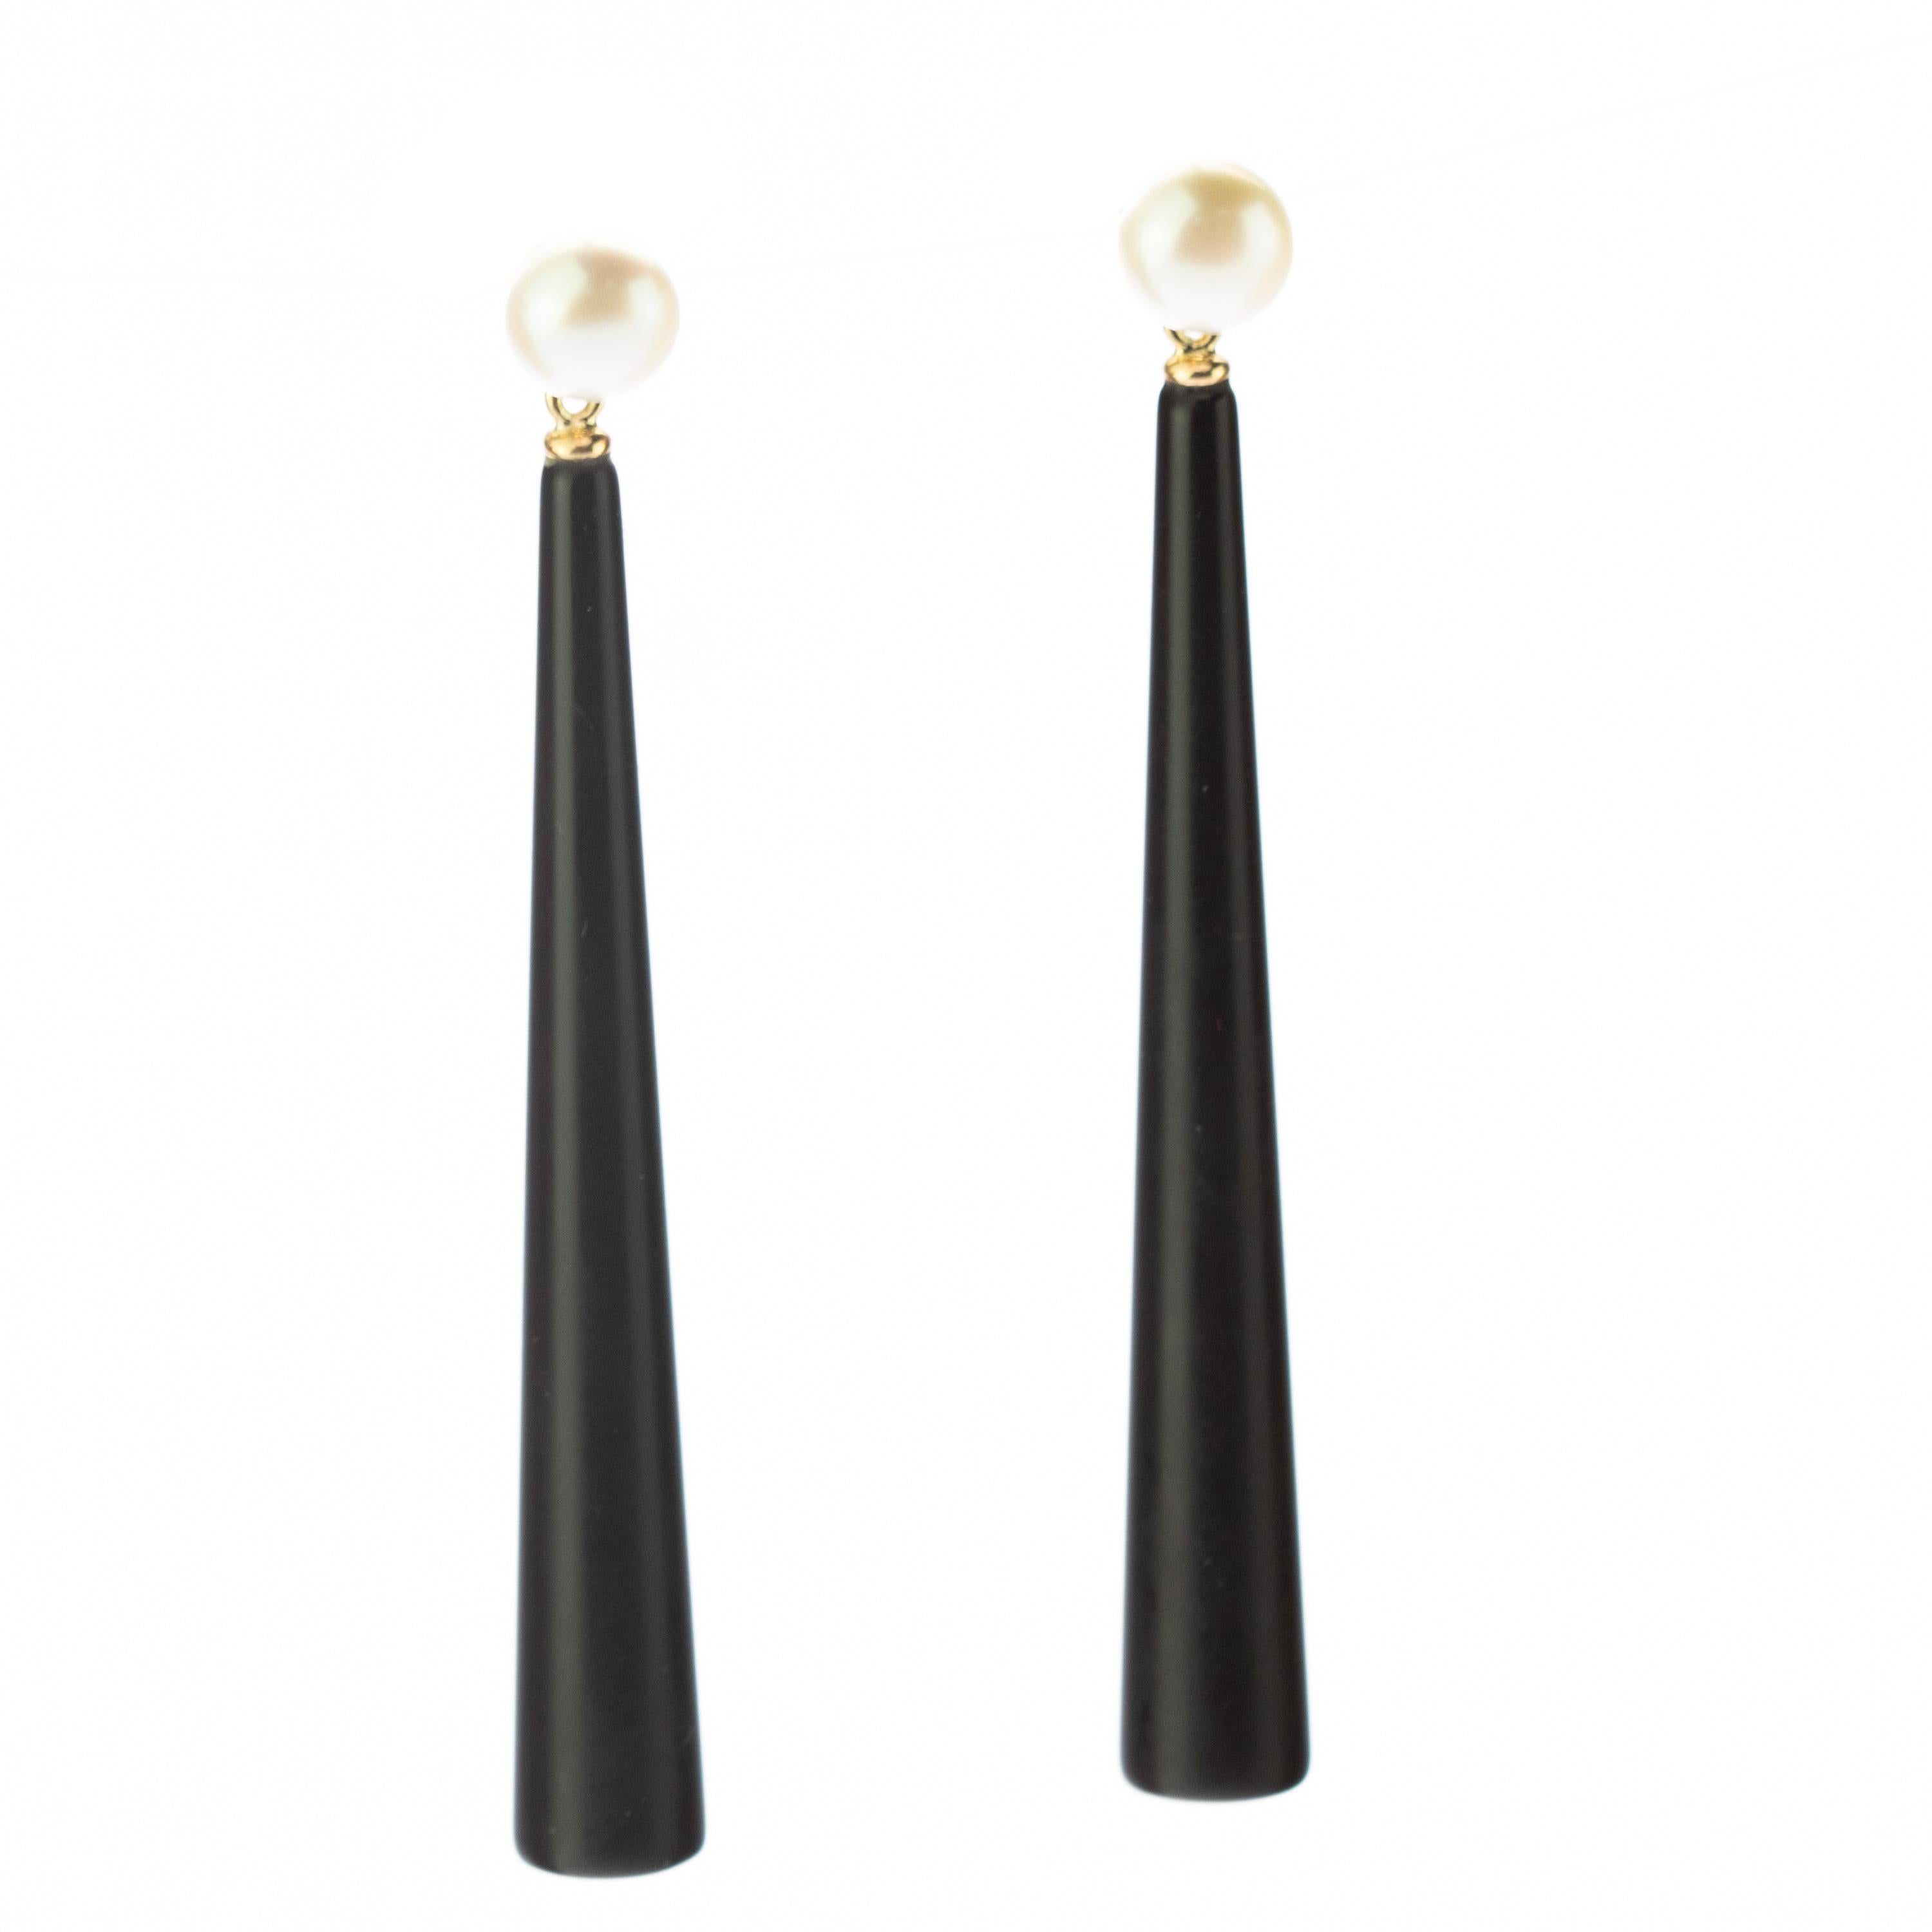 Clear and fashionable black bold long agate crafted earrings. Holded by a 18 karat yellow gold that recreates a stylish piece of jewelry embellished with natural pearls. The perfect touch full of modernity with a tear drop design. Bold tear drop